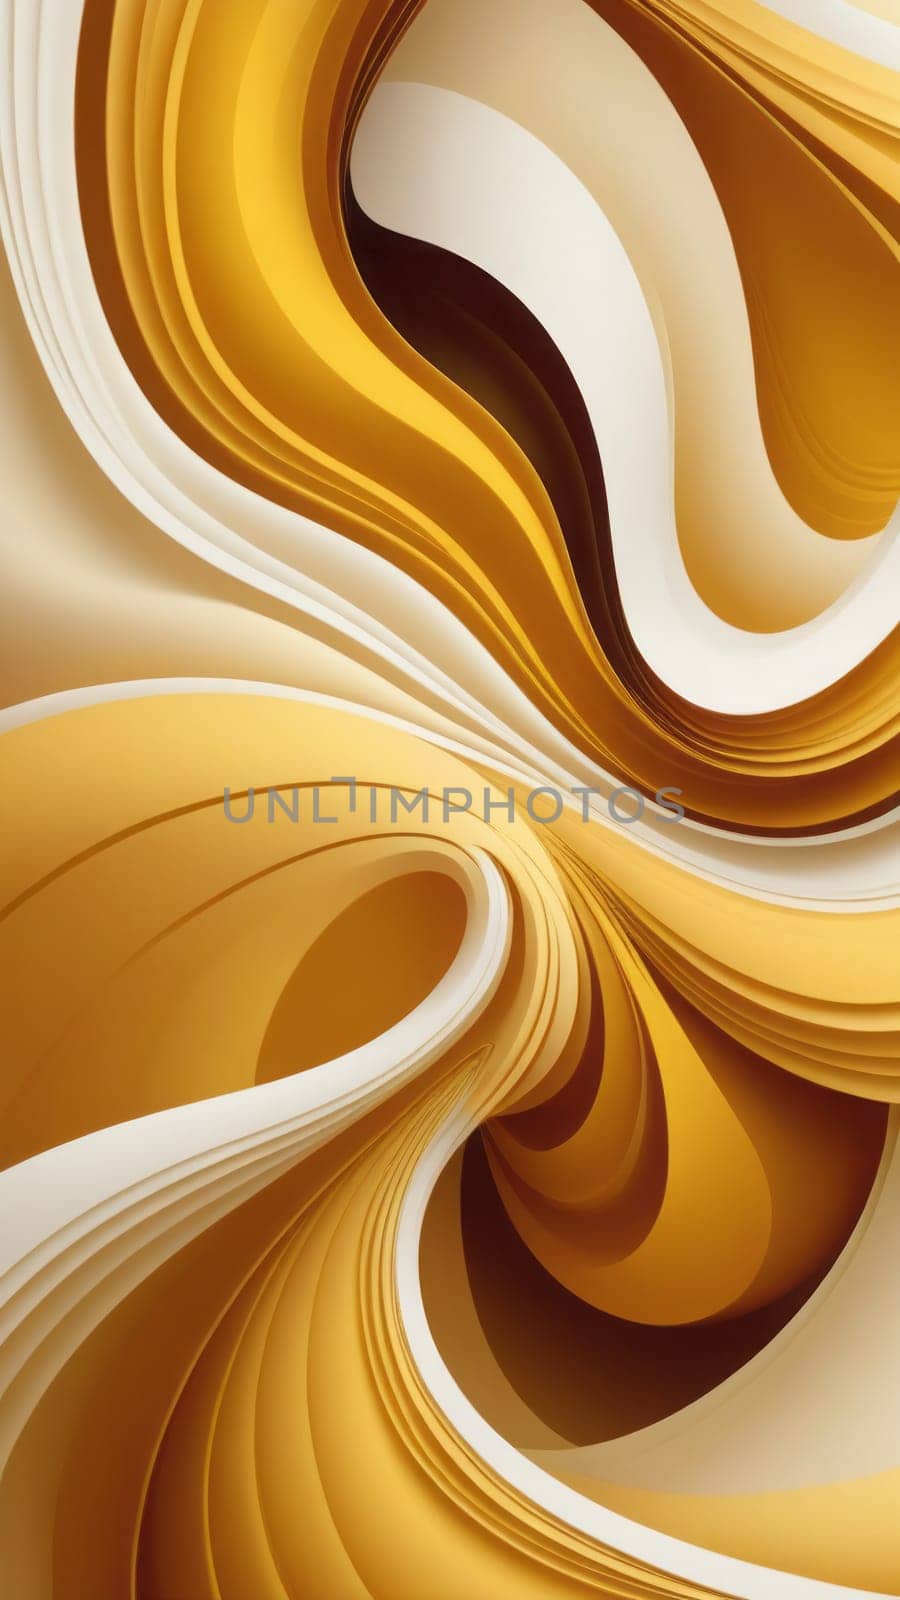 Background from Swirled shapes and white by nkotlyar